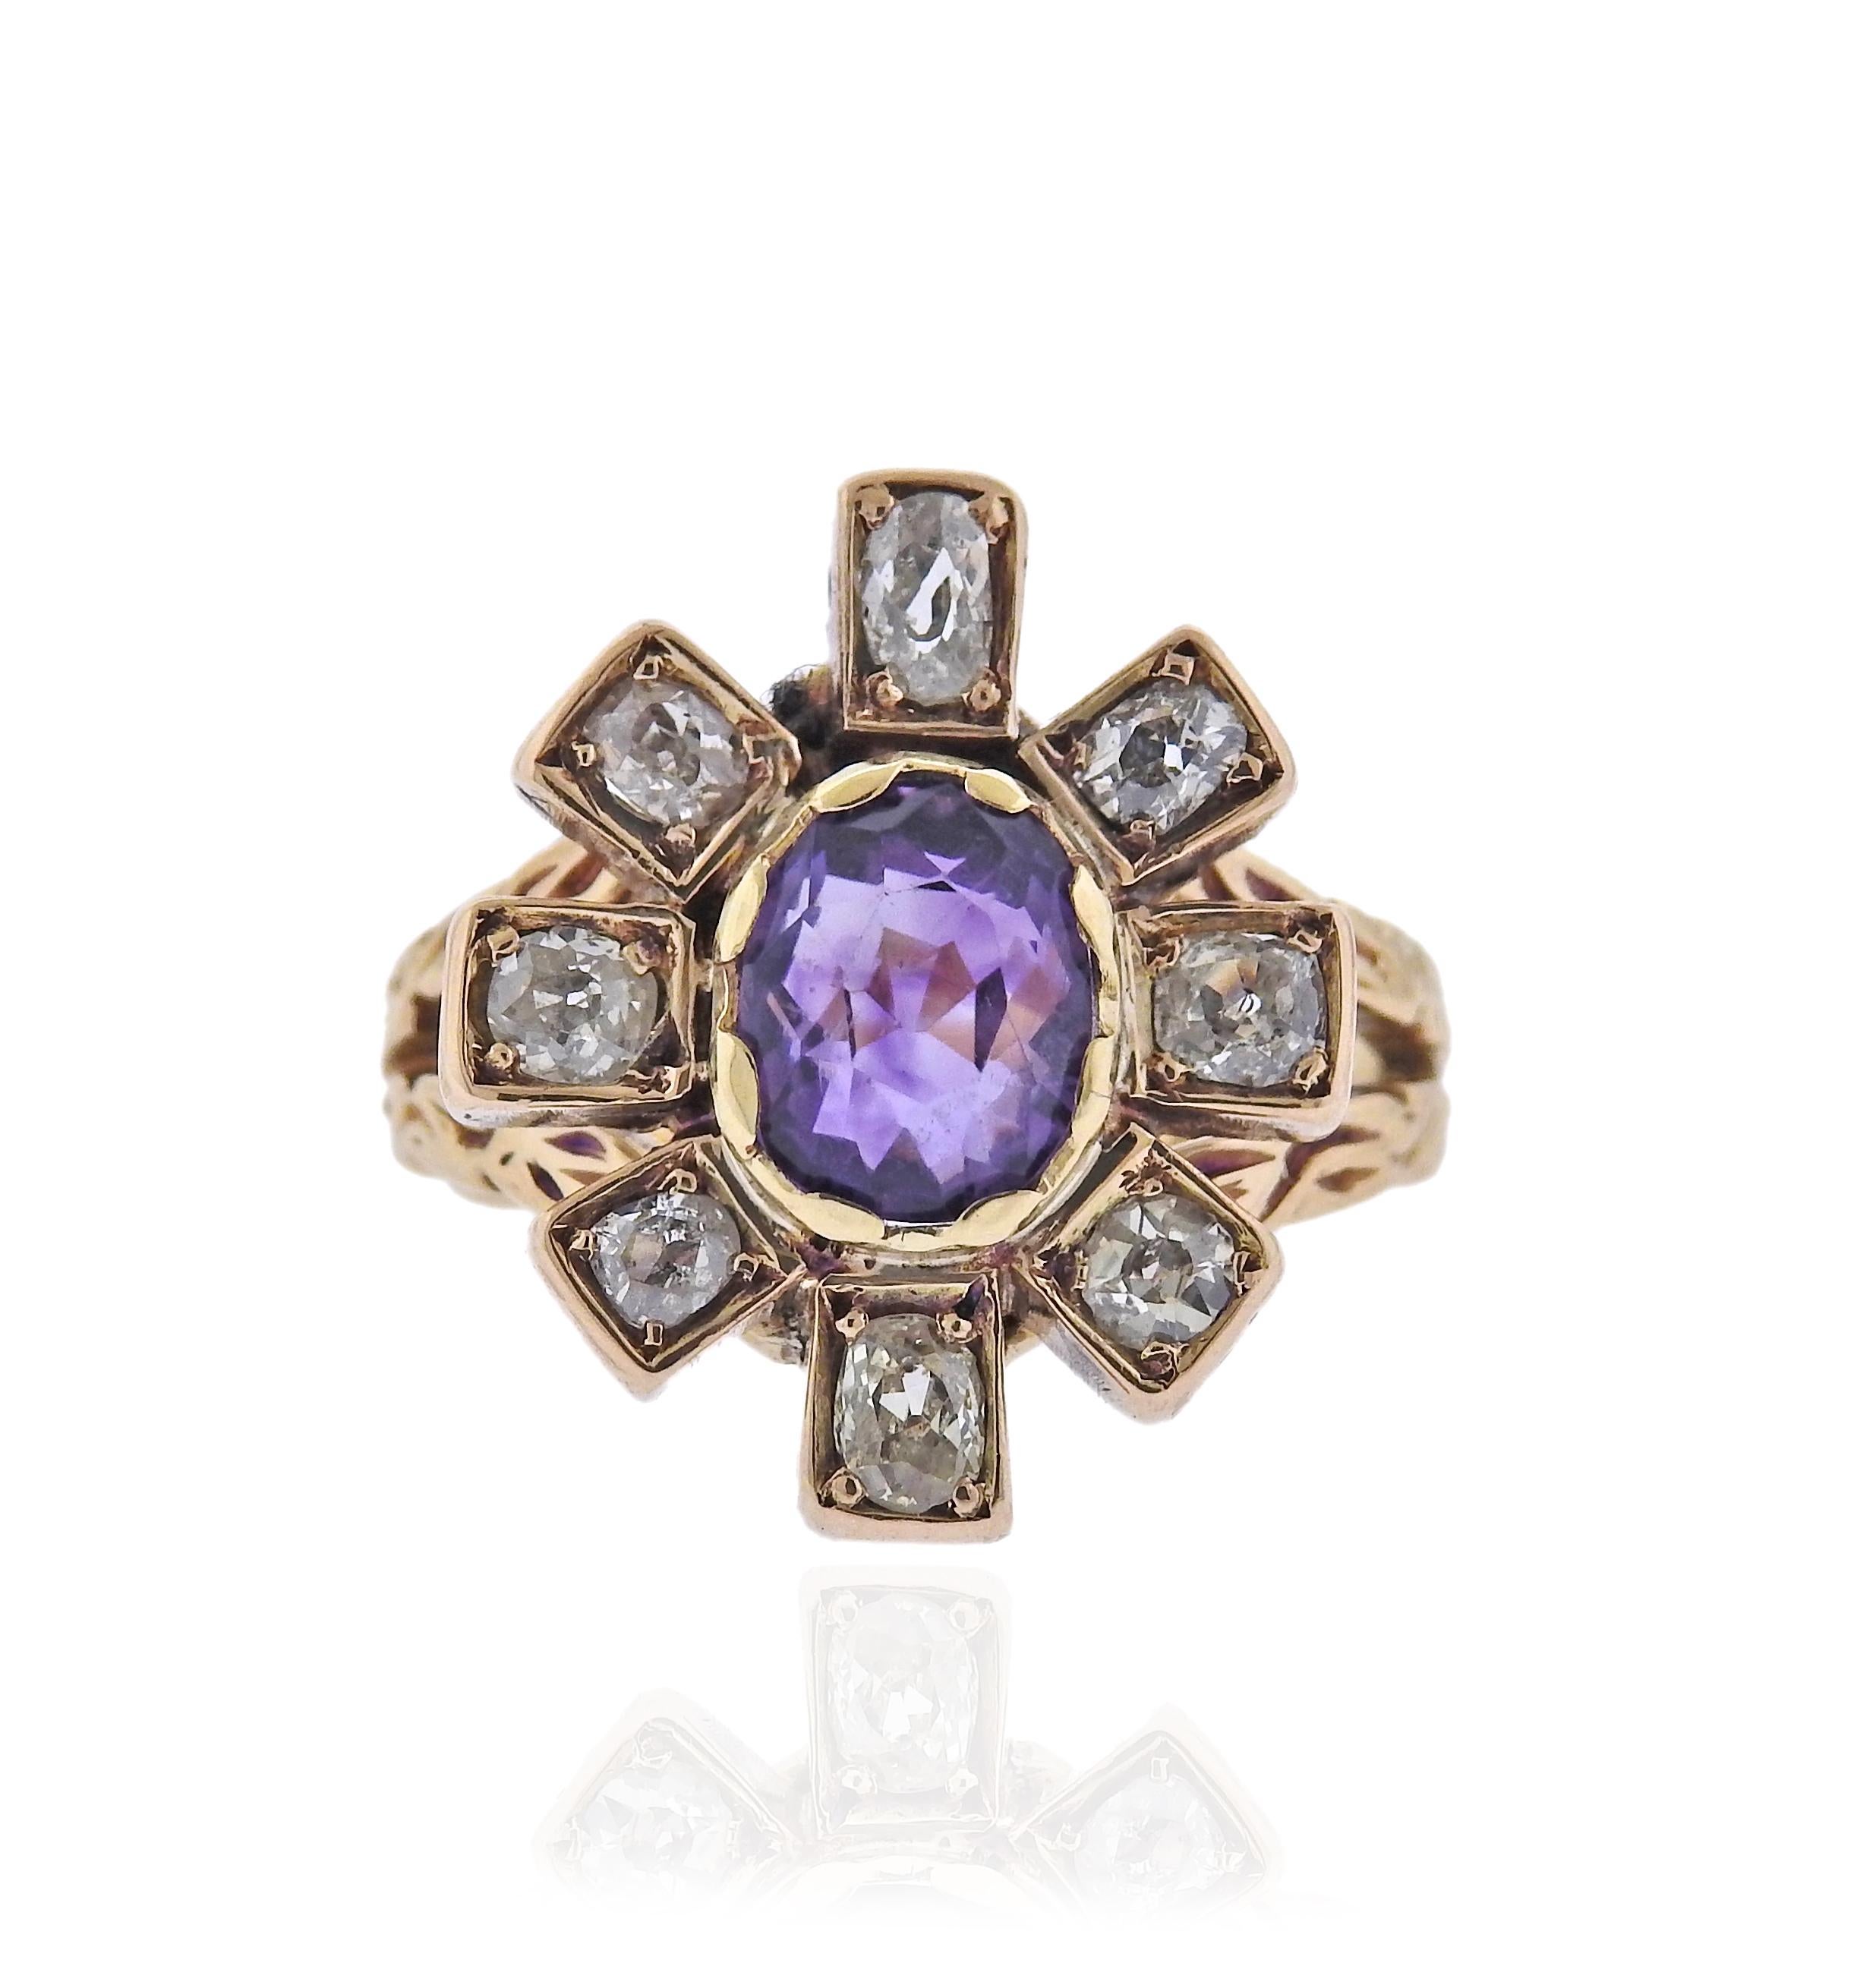 English made 18k gold ring, with center 8 6.3mm amethyst and approx. 0.90ctw old mine cut diamonds. Ring size 6.25 (EU 52), top is 19 x 16mm. Marked with English gold marks. Weight 7.6 grams.